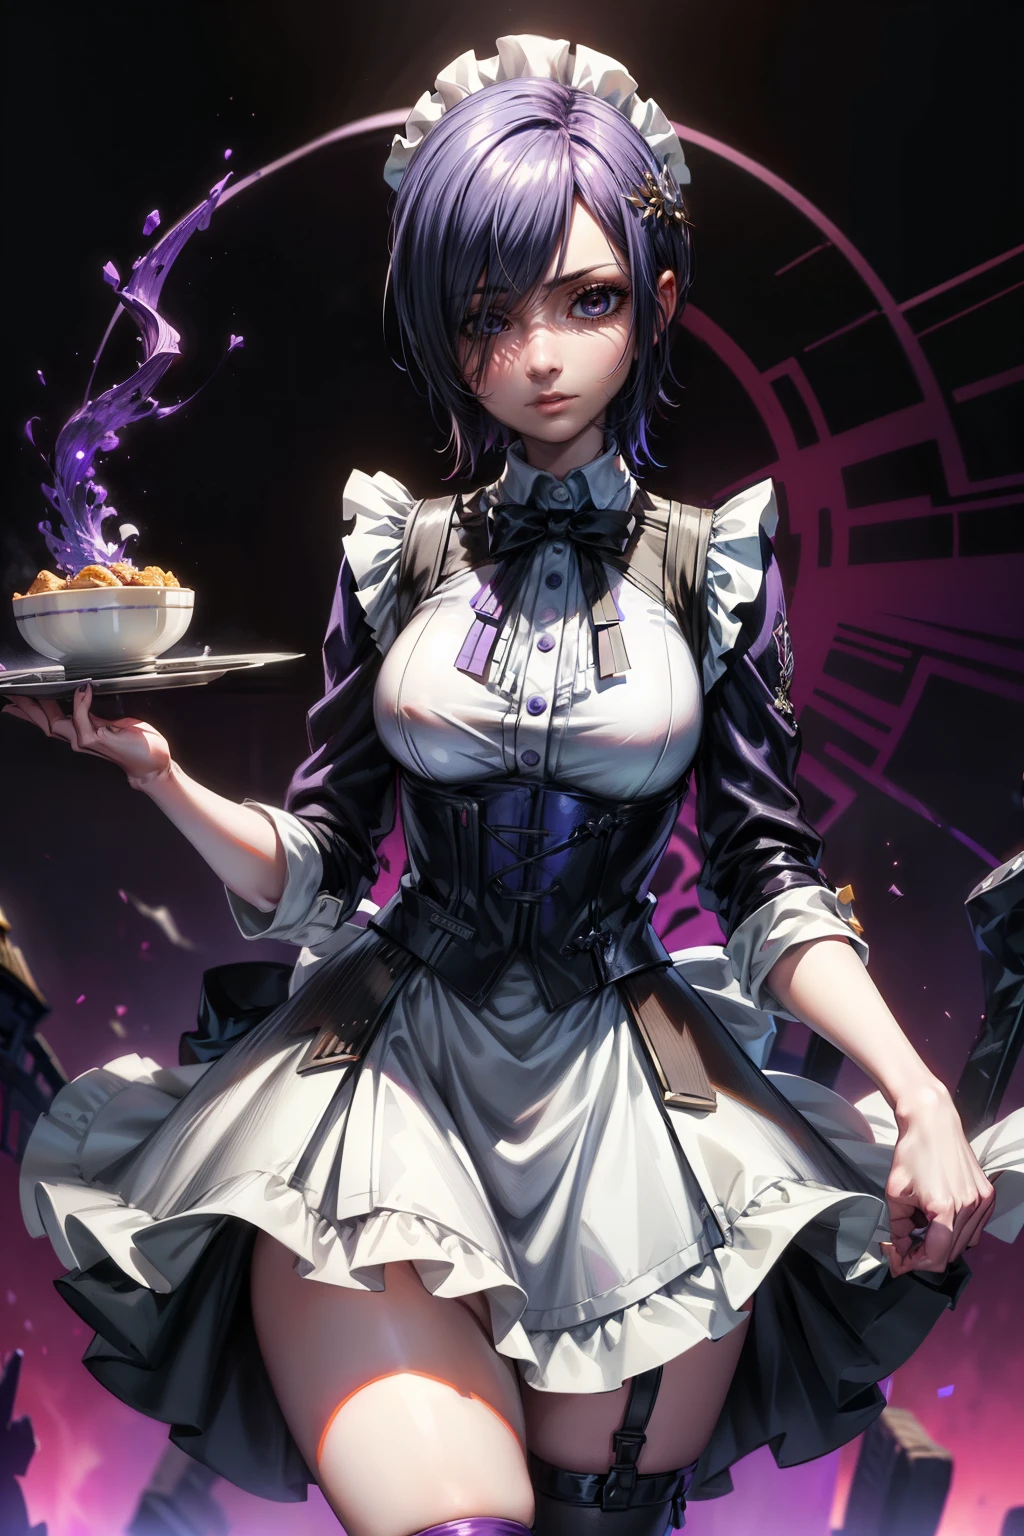 Beautiful face, beauty, white skin, purple-blue eyes, short purple-blue hair, hair covering her left eye, cute body, Cute waitress outfit, detailed black dress, white embellished apron, An ornate dress containing embellishments and bows, a castle maid's dress, black tie, castle background, Touka Kirishima, Tokyo Ghoul 